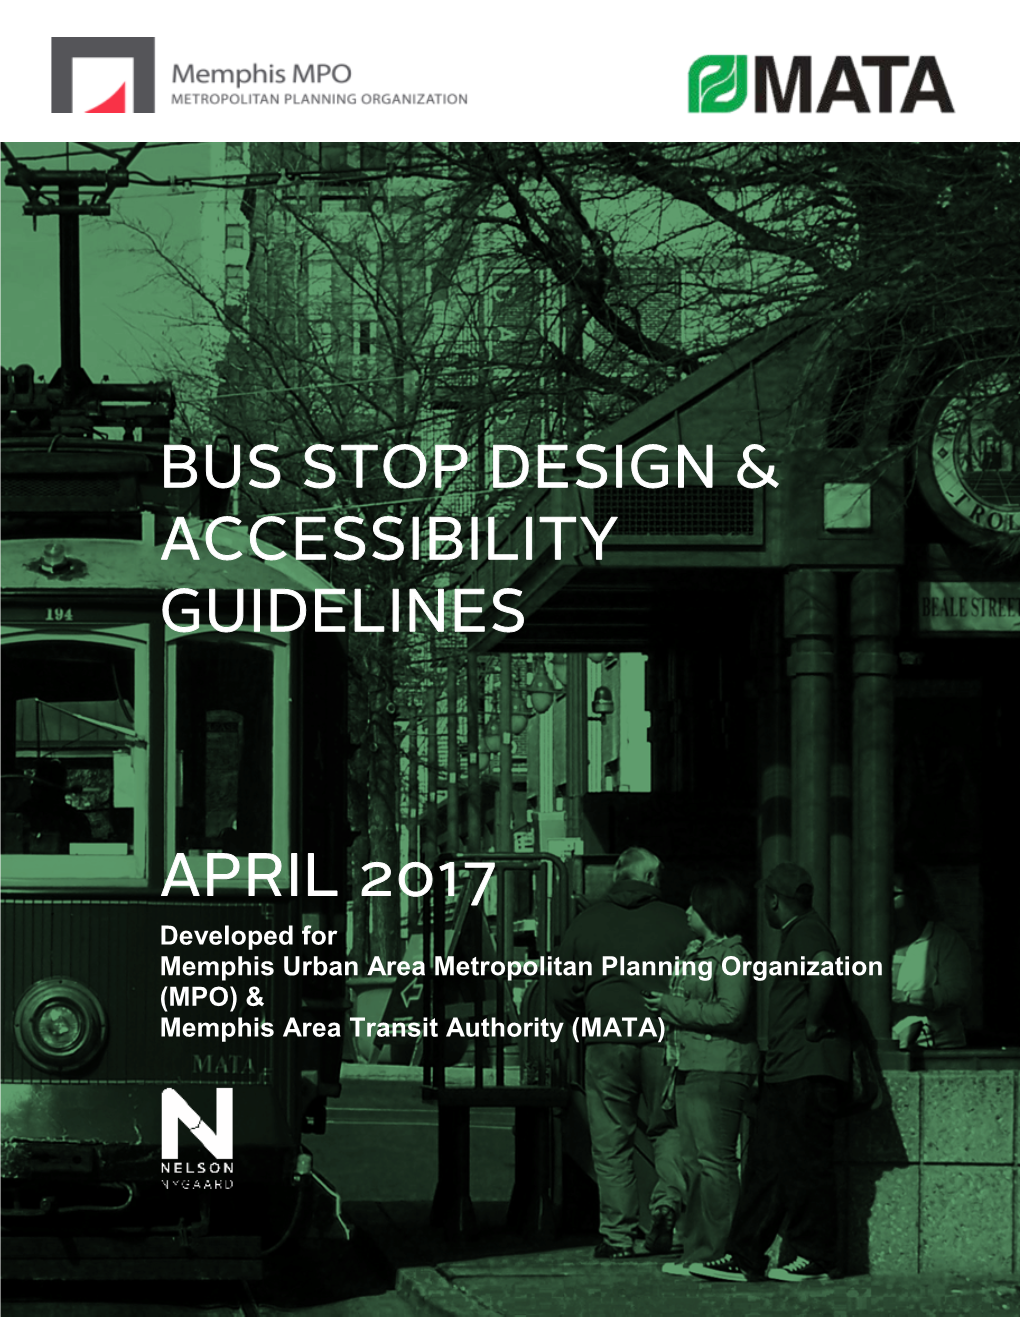 Bus Stop Design & Accessibility Guidelines